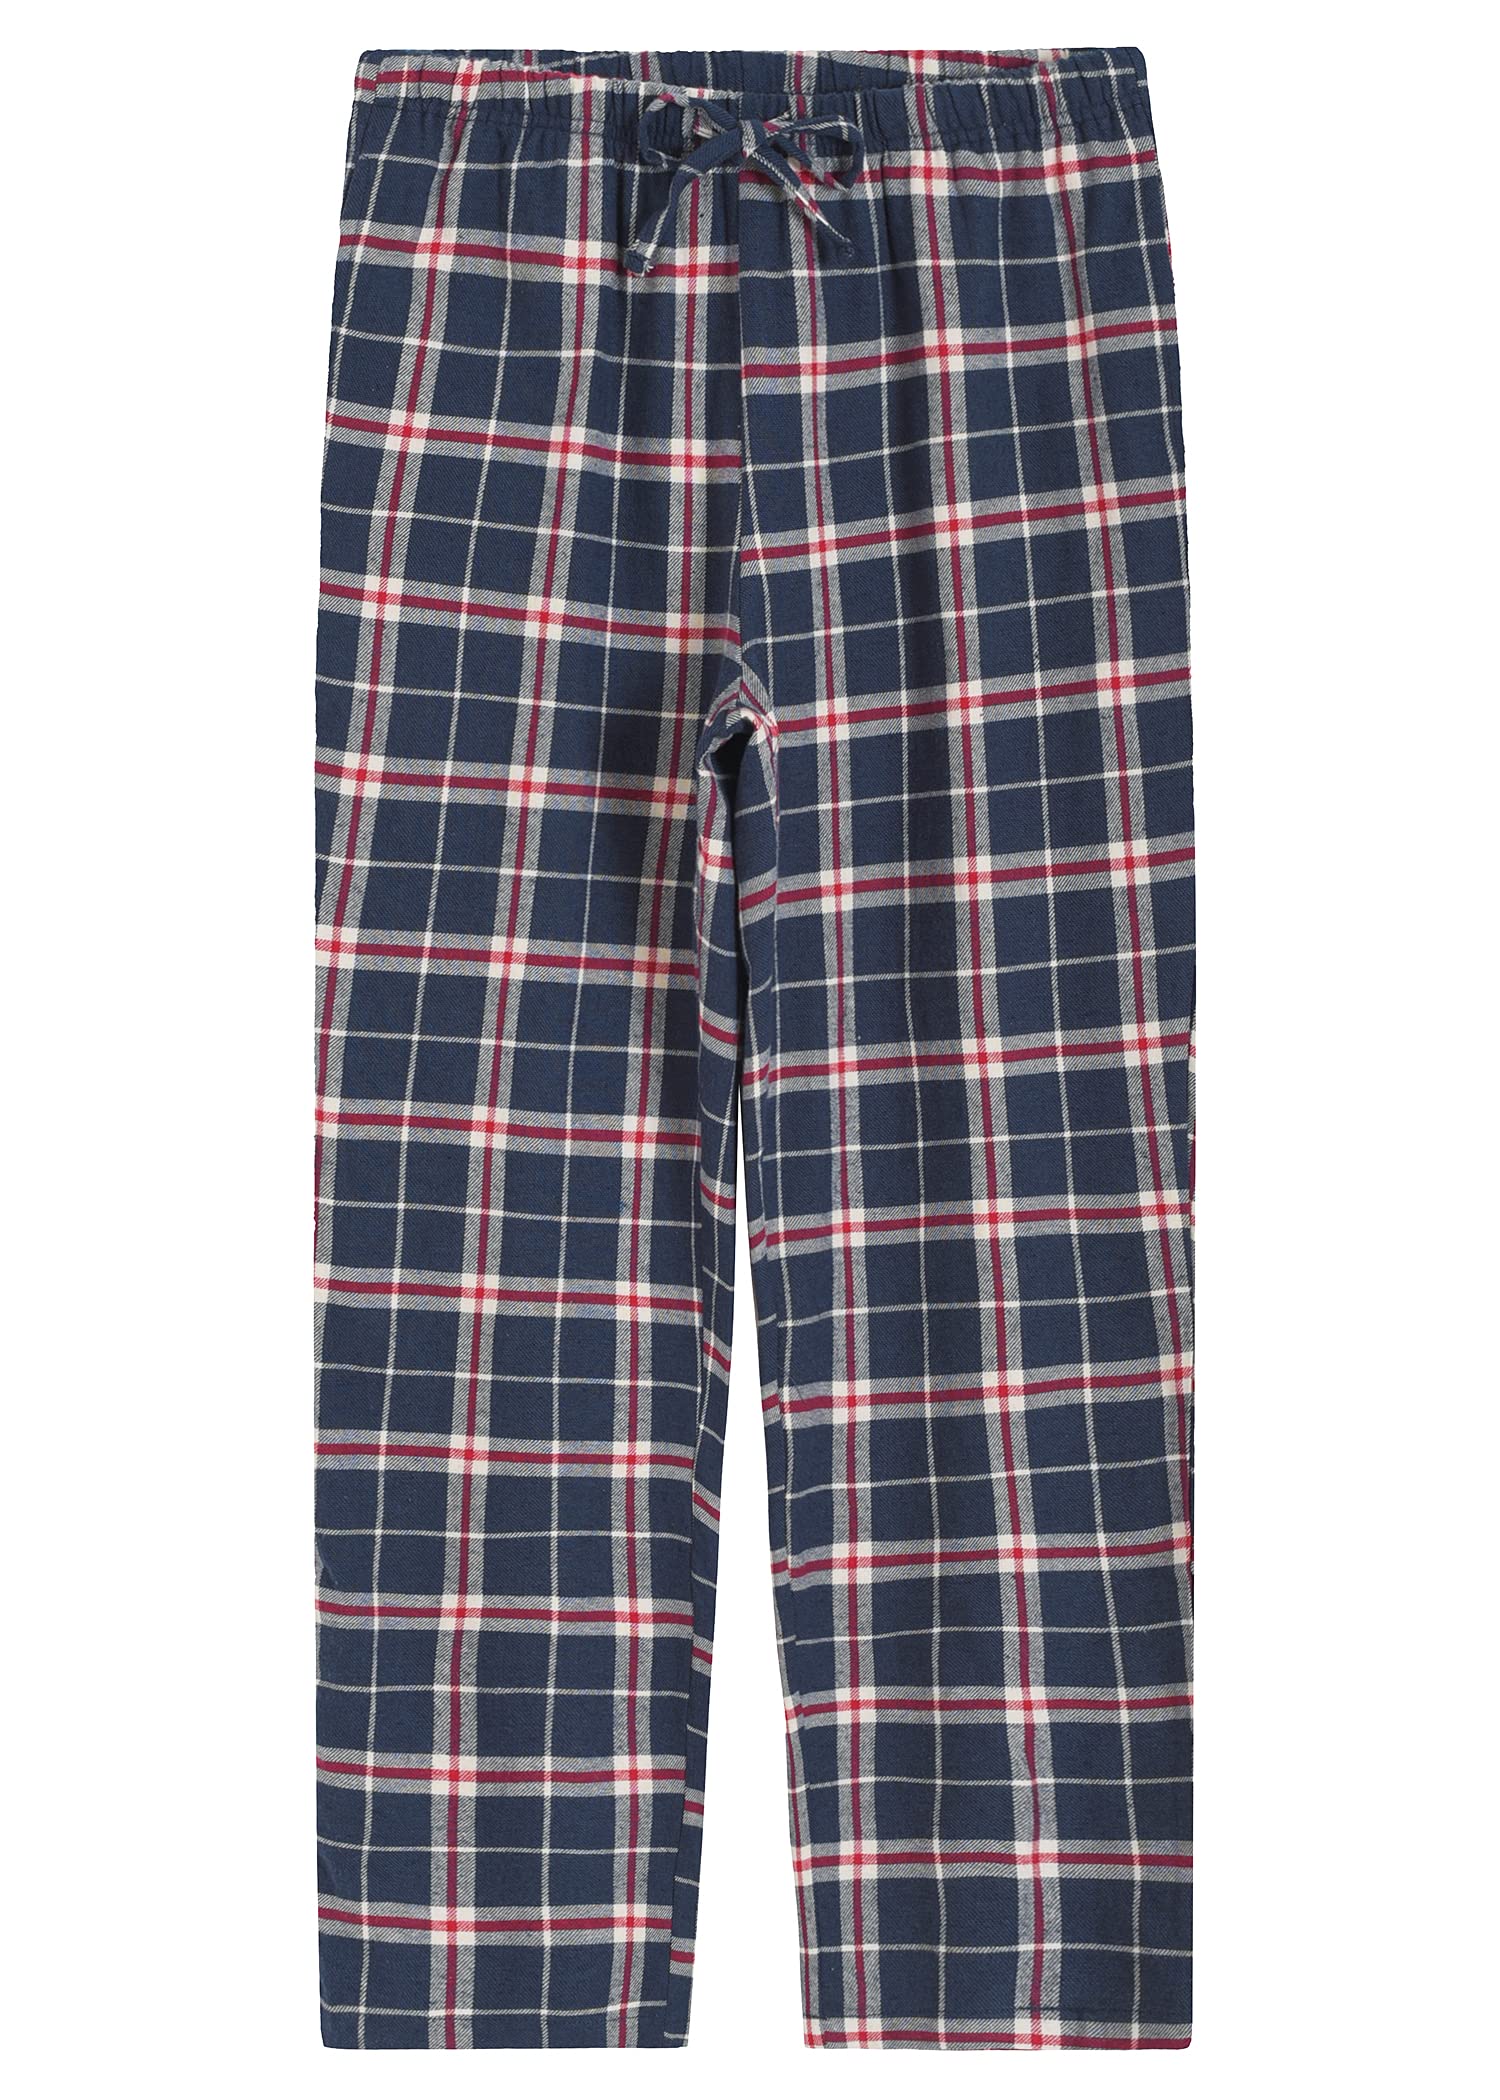 Nayked Apparel Mens Big Ridiculously Soft Brushed Flannel Lounge Pants  with Pockets